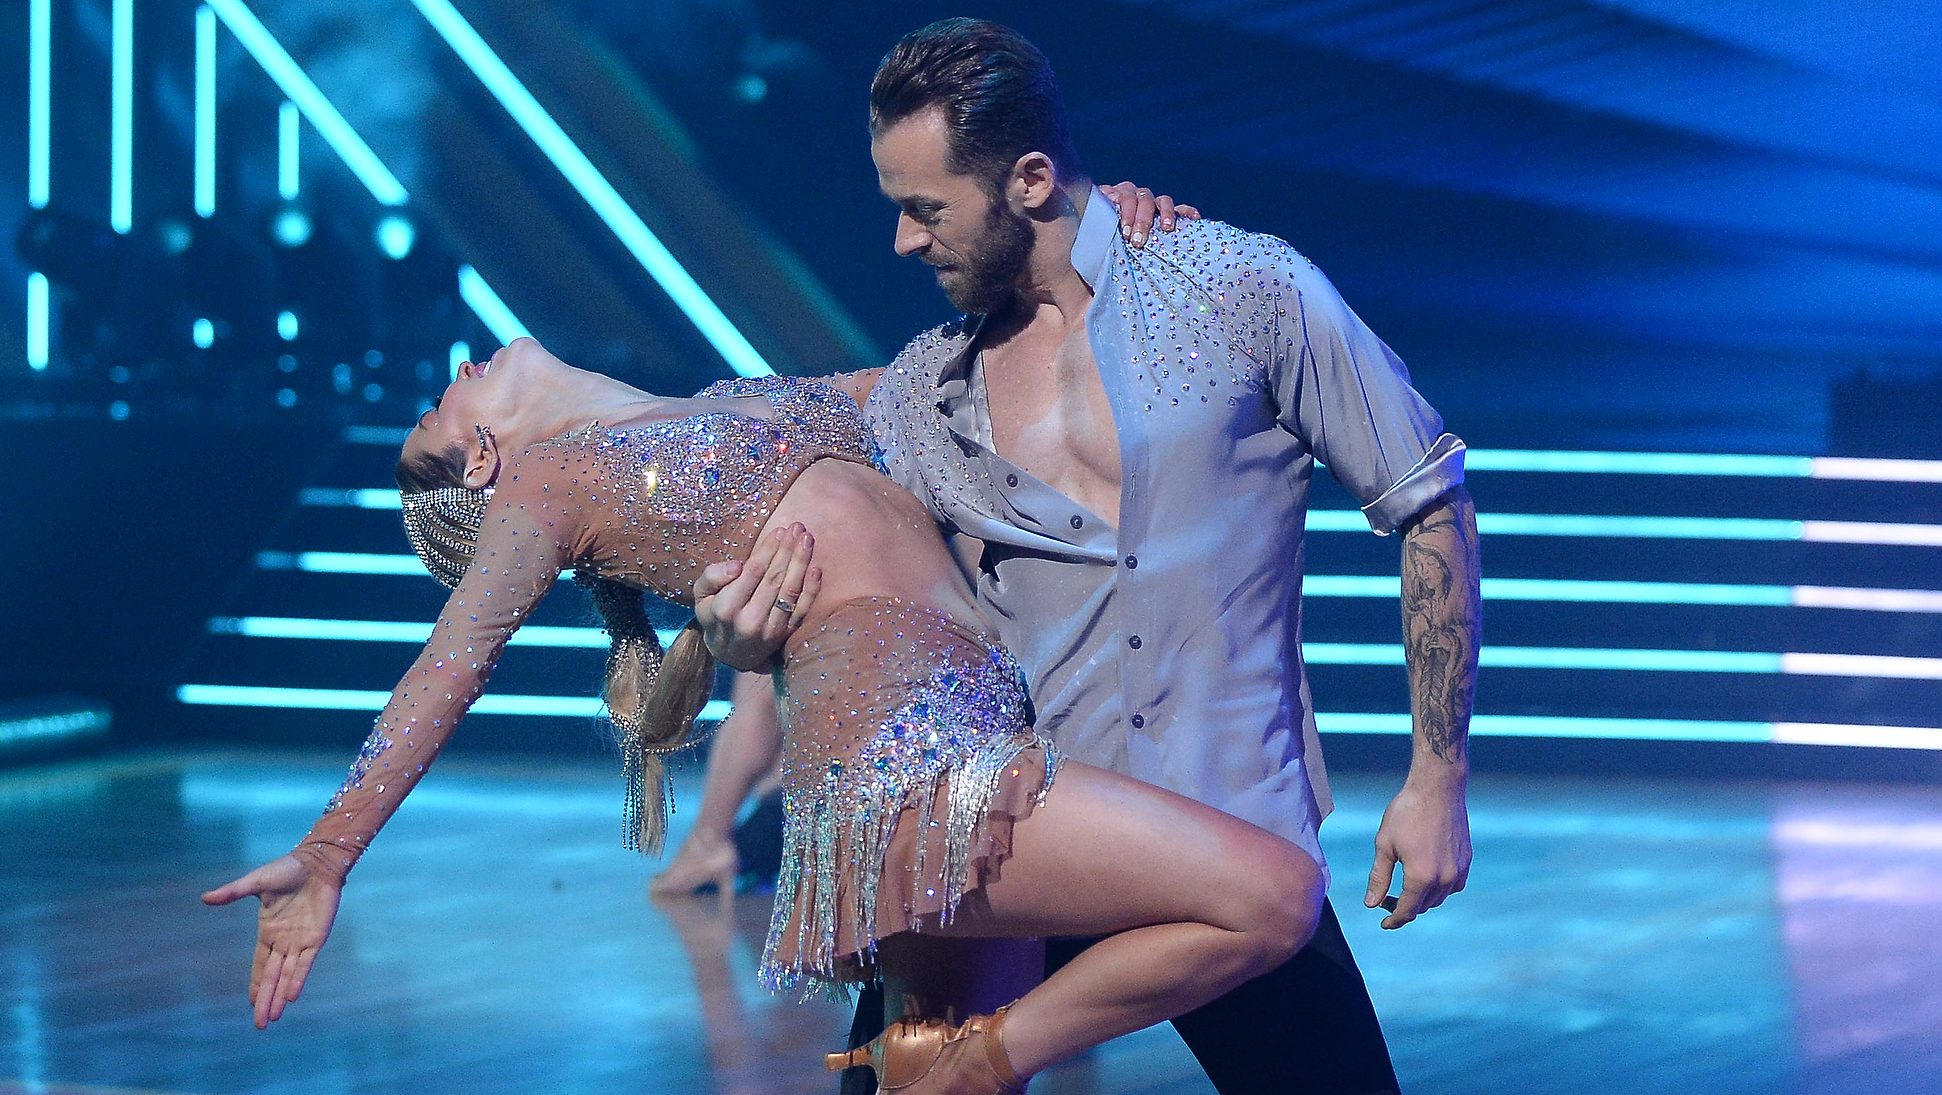 ‘DWTS’ 2020 Finale Date ‘Dancing with the Stars’ Time & Schedule